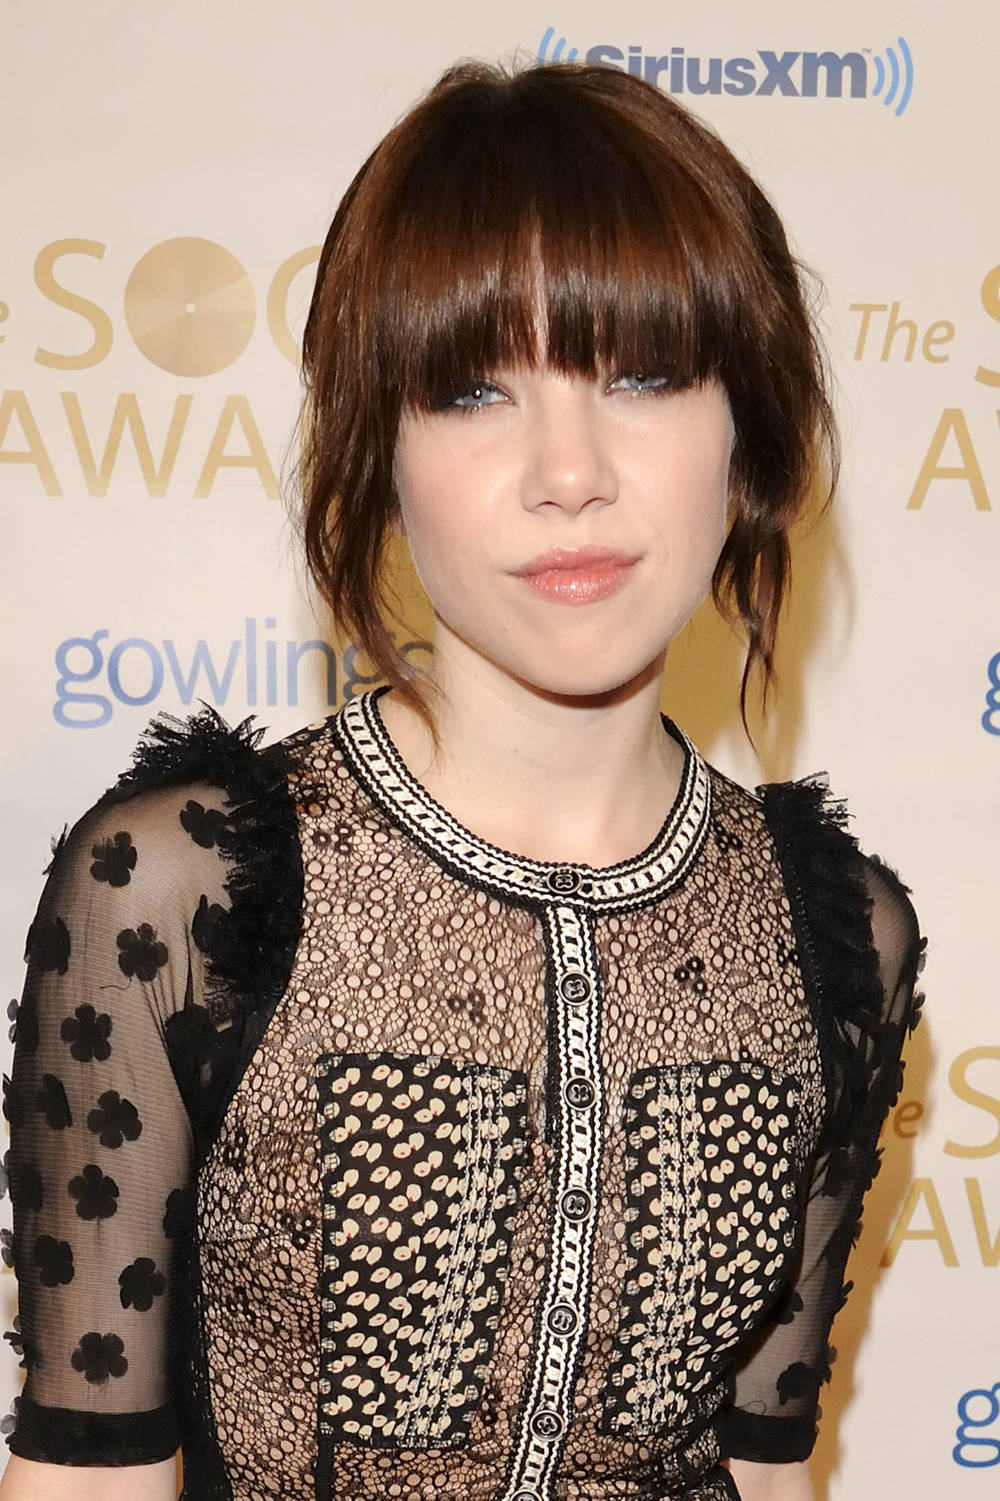 Picture Of Carly Rae Jepsen In General Pictures Carly Rae Jepsen 1426445526 Teen Idols 4 You